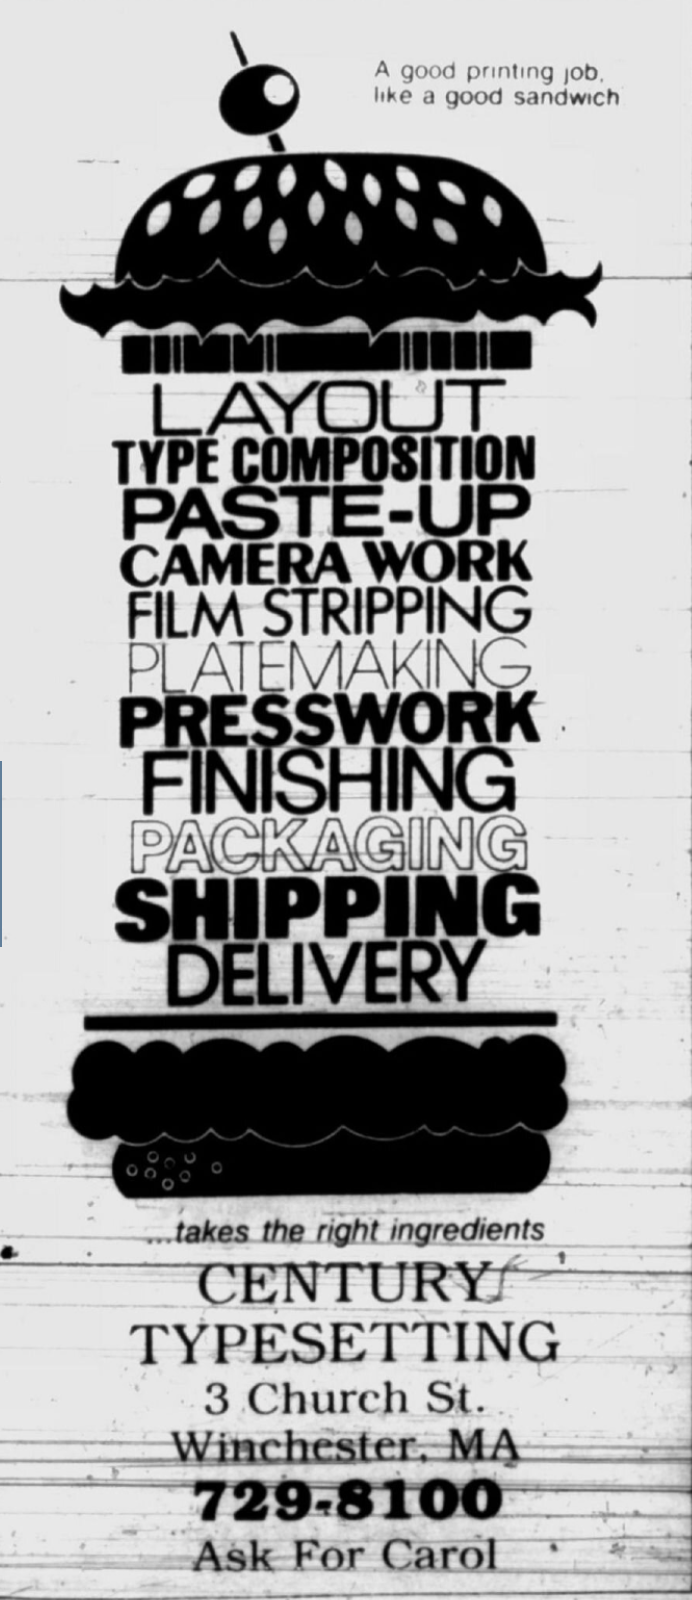 Copy of an old newspaper ad showing a very tall illustration of a burger with a catch phrase: "A good printing job, like a good sandwich, takes the right ingredients." The layers between the buns  are depicted as typeset words in varying fonts: "Layout, Type Composition, Paste-up, Camera work, film stripping, platemaking, presswork, finishing, packaging, shipping, and delivery." 